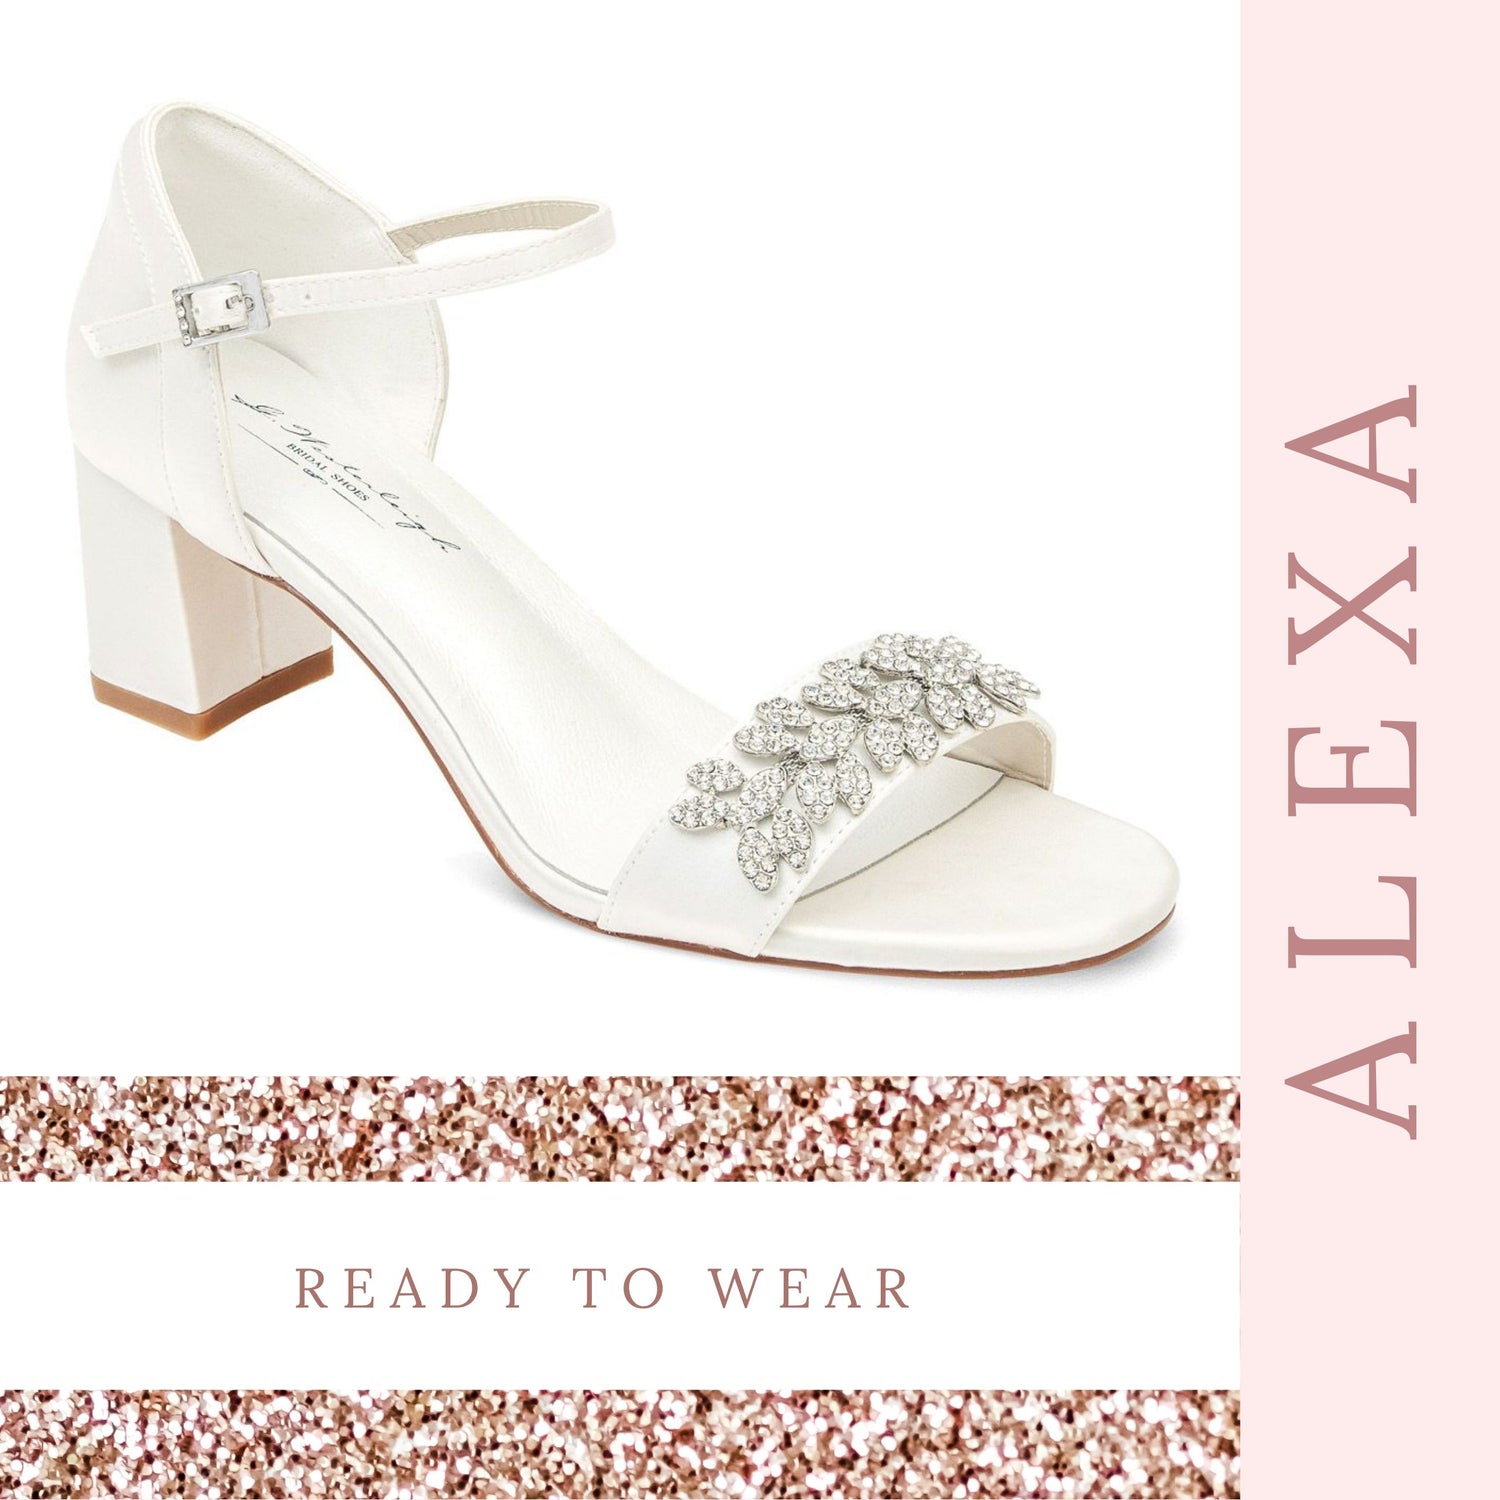 Buy Block Heel Wedding White Sandals With Perls White Bridal Shoes Women's Wedding  Shoes Ankle Strap Heels christa Online in India - Etsy